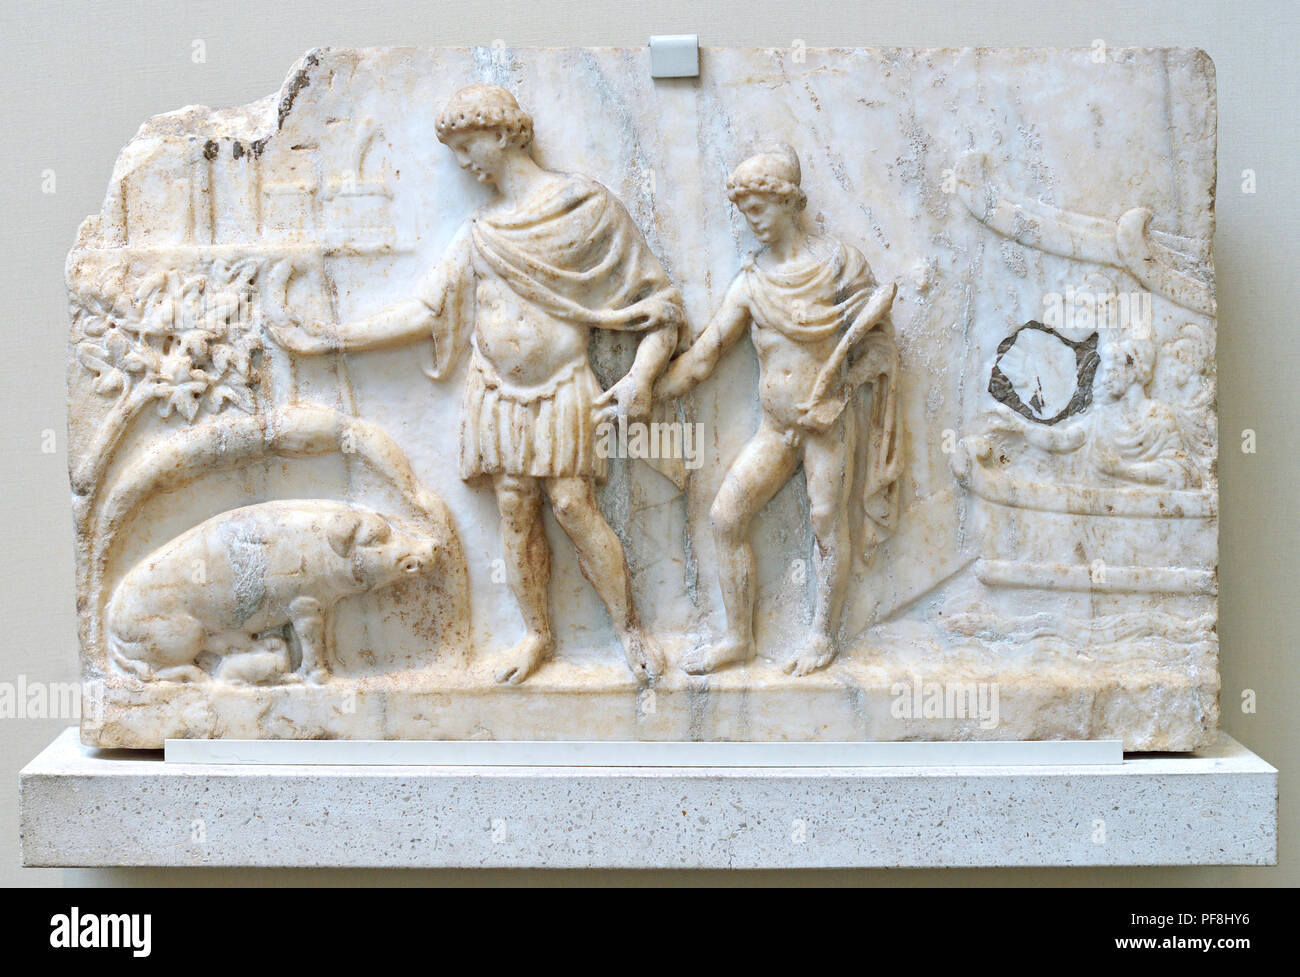 Aeneas In Italy High Resolution Stock Photography and Images - Alamy